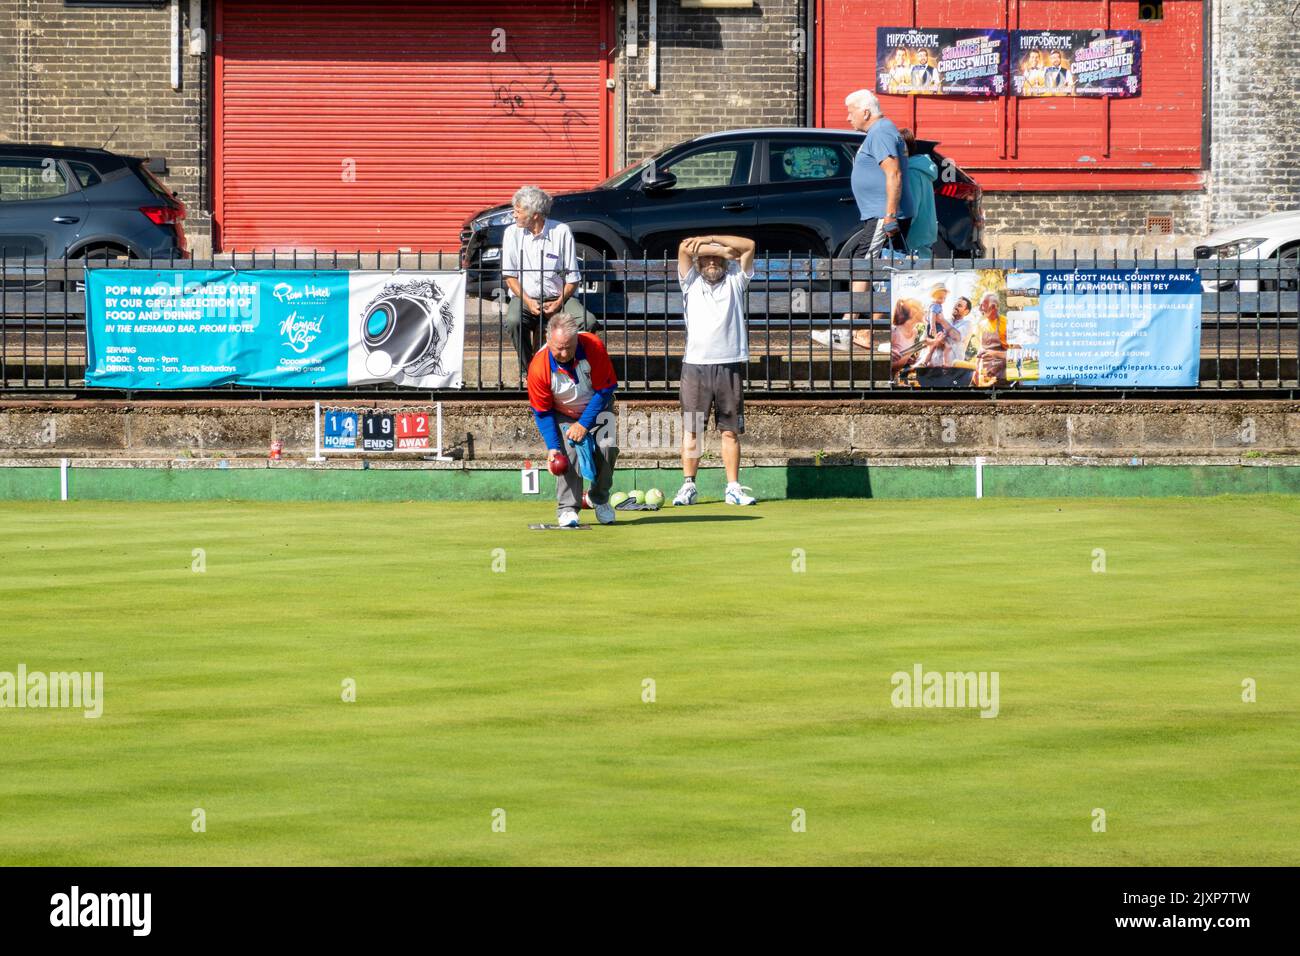 Great Yarmouth bowling Greens with player competing on a summers day Stock Photo